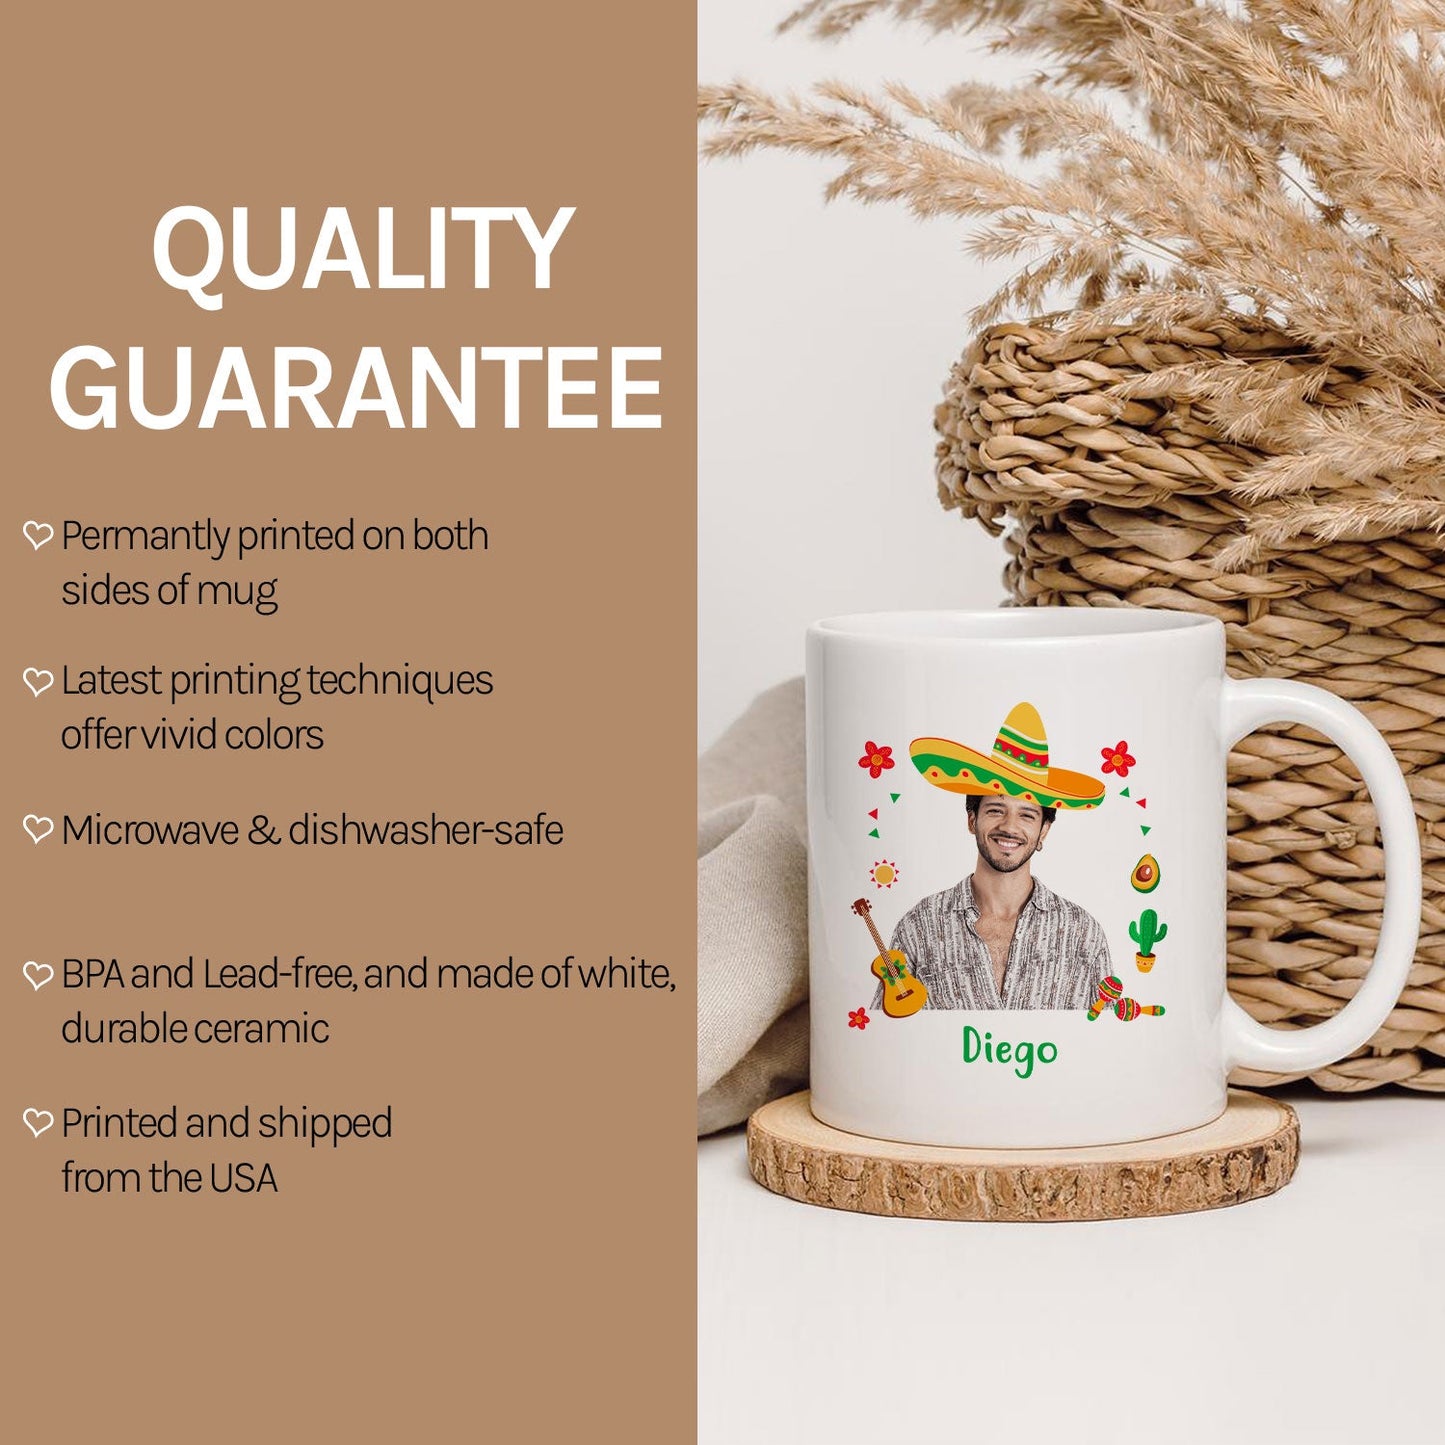 Papacito - Personalized  gift For Mexican Dad - Custom Mug - MyMindfulGifts